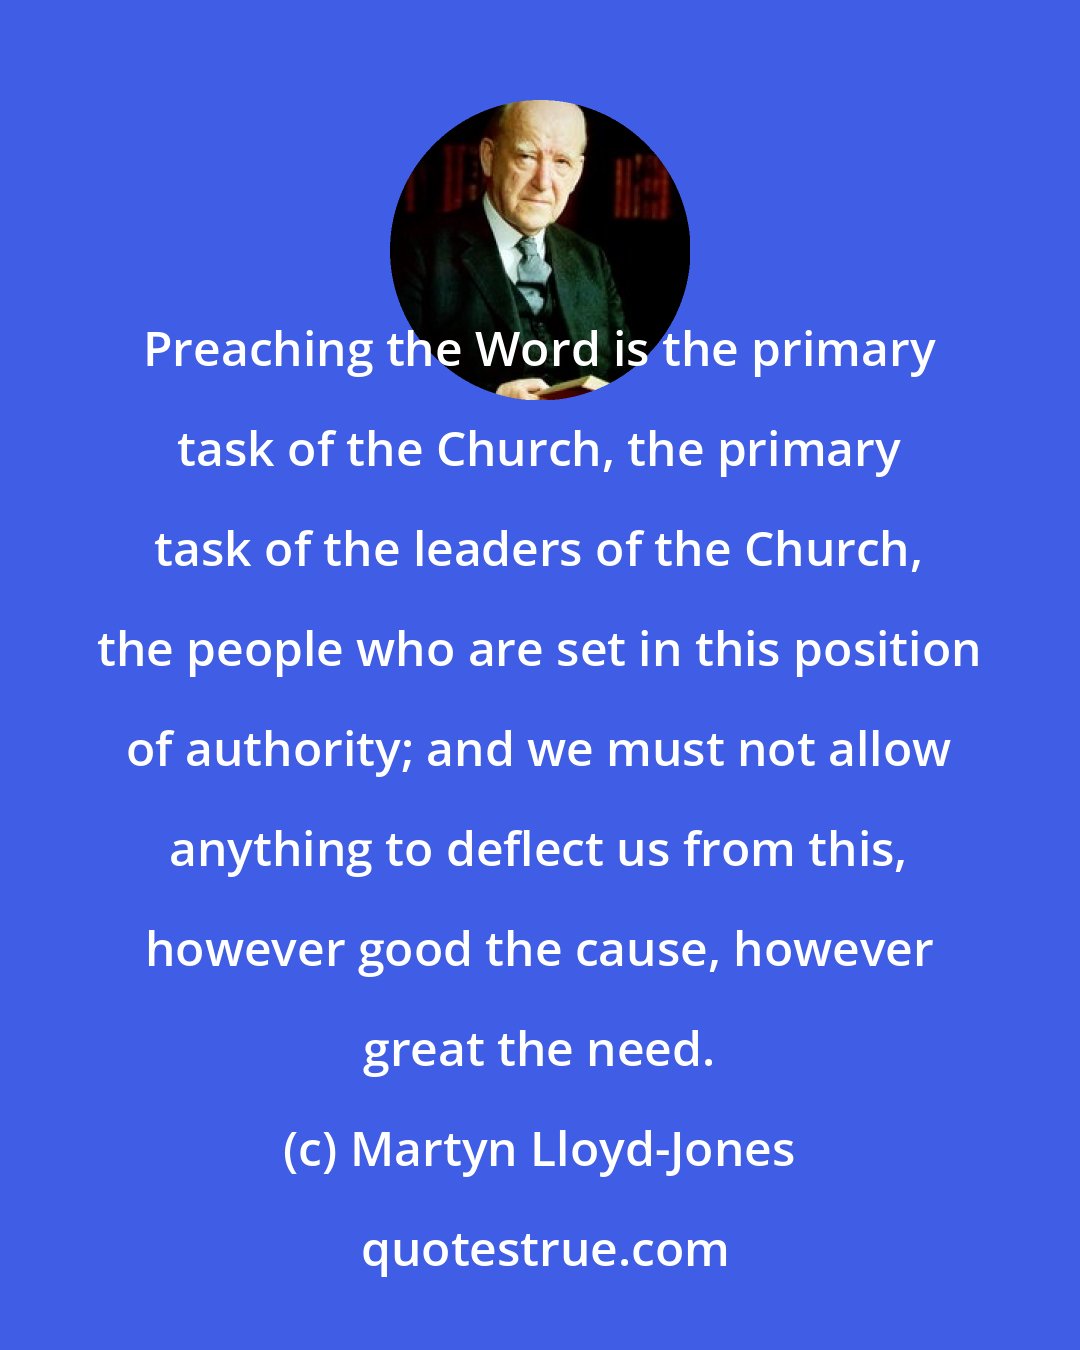 Martyn Lloyd-Jones: Preaching the Word is the primary task of the Church, the primary task of the leaders of the Church, the people who are set in this position of authority; and we must not allow anything to deflect us from this, however good the cause, however great the need.